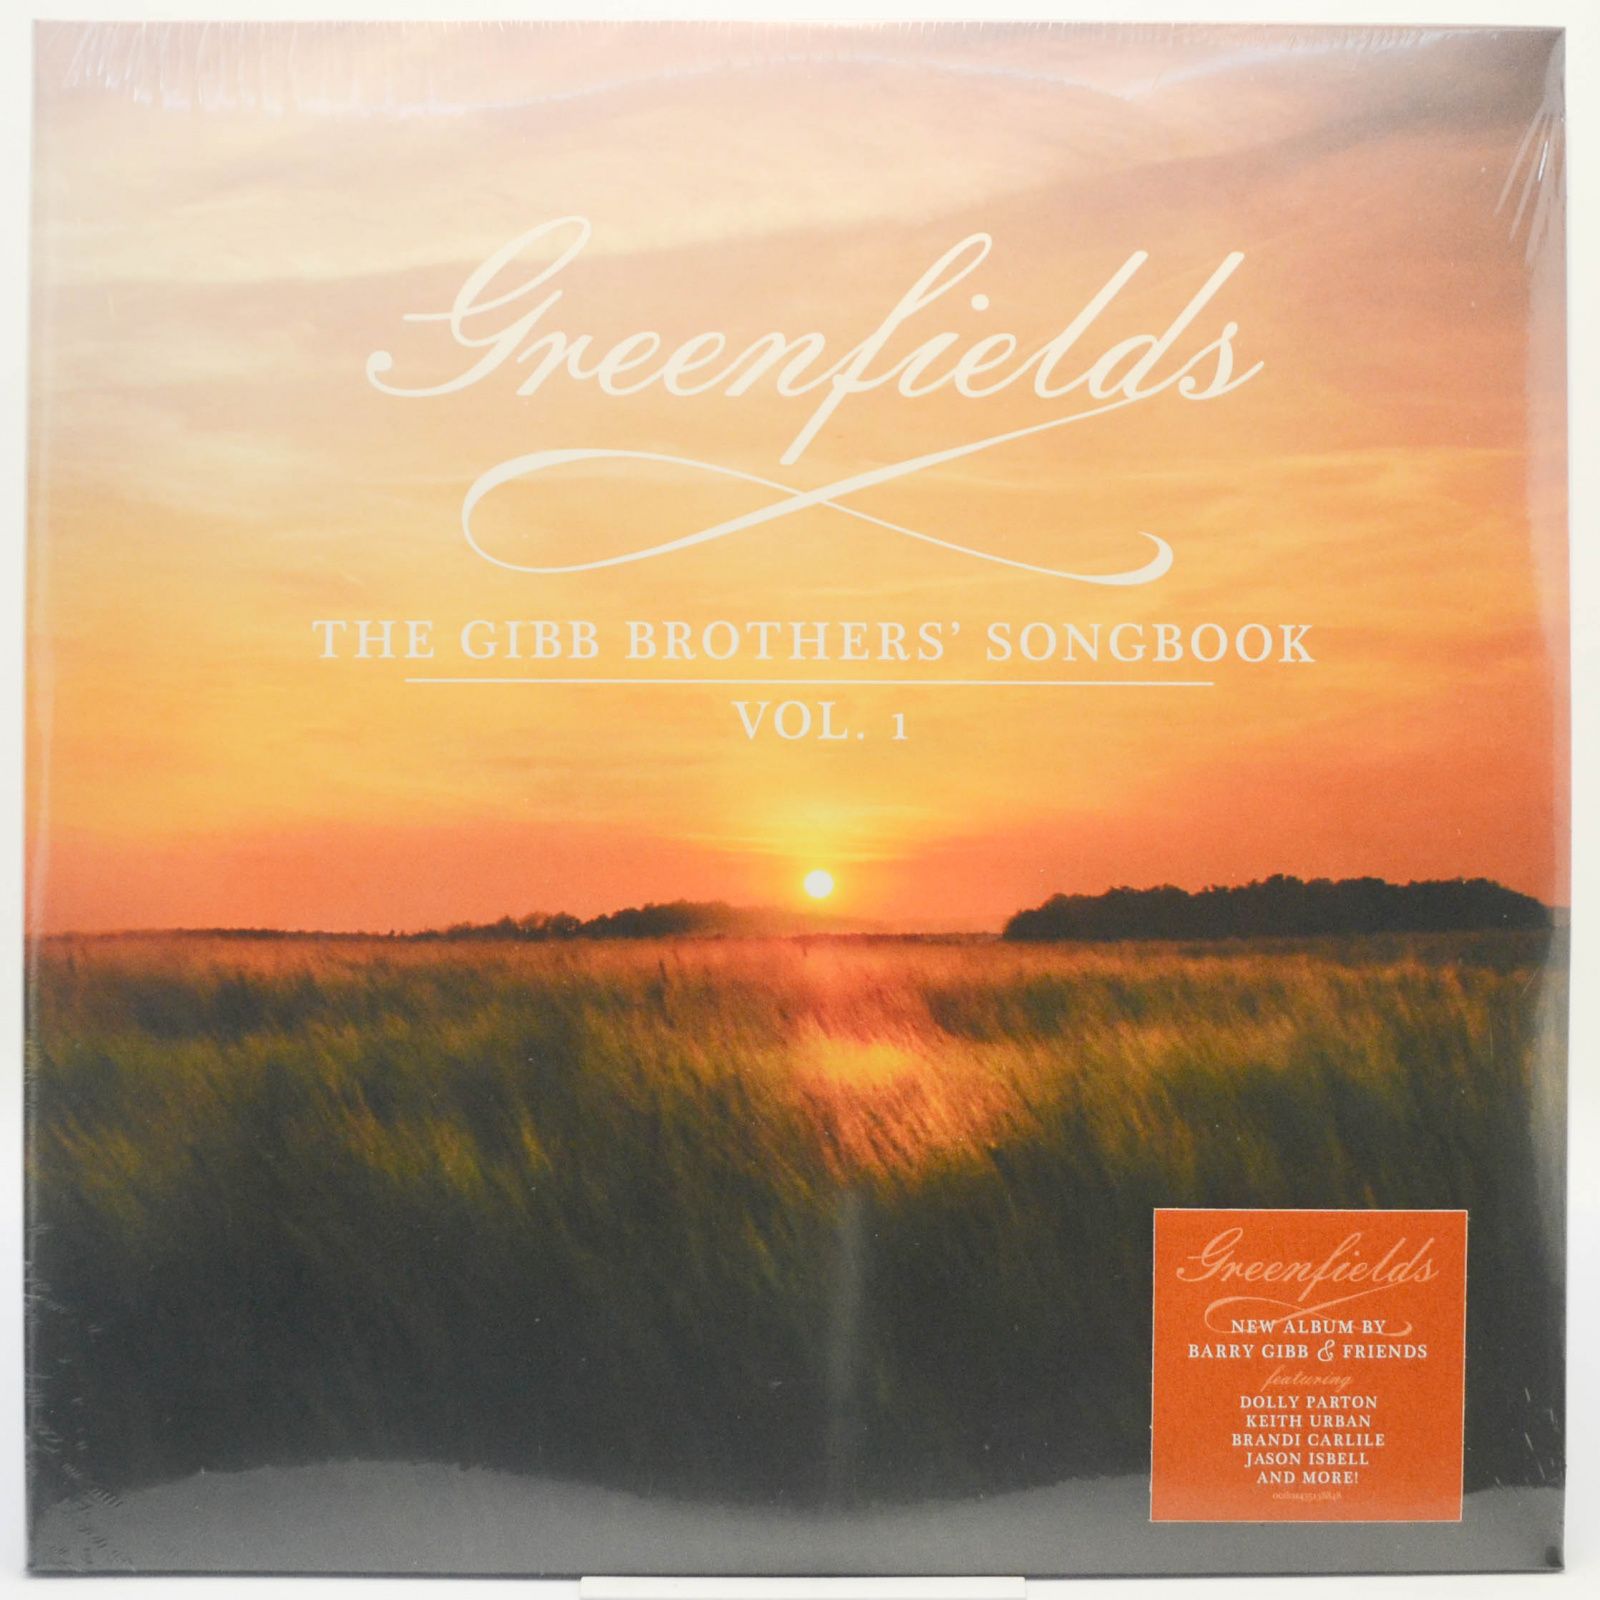 Barry Gibb & Friends — Greenfields: The Gibb Brothers' Songbook Vol. 1 (2LP), 2021